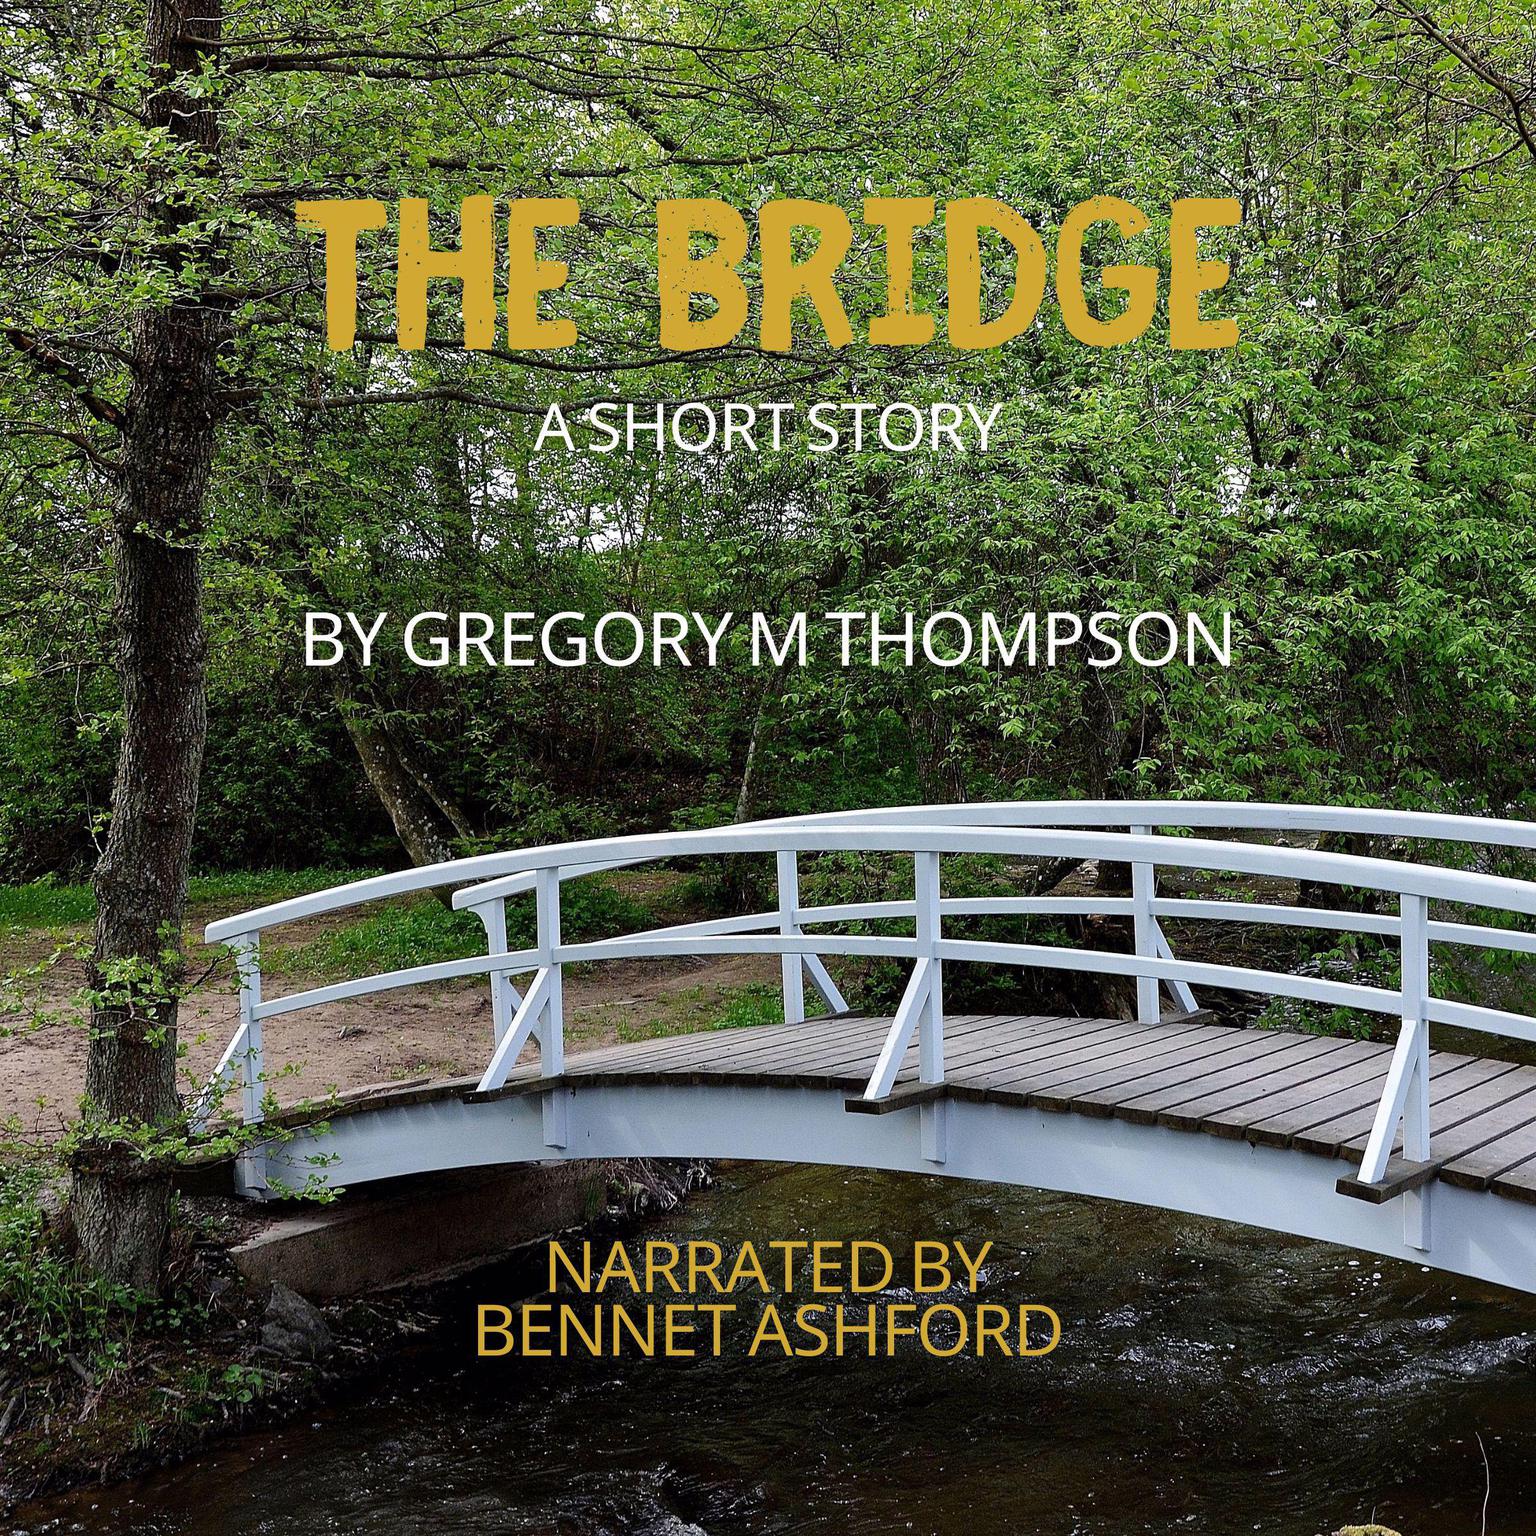 The Bridge Audiobook, by Gregory Thompson